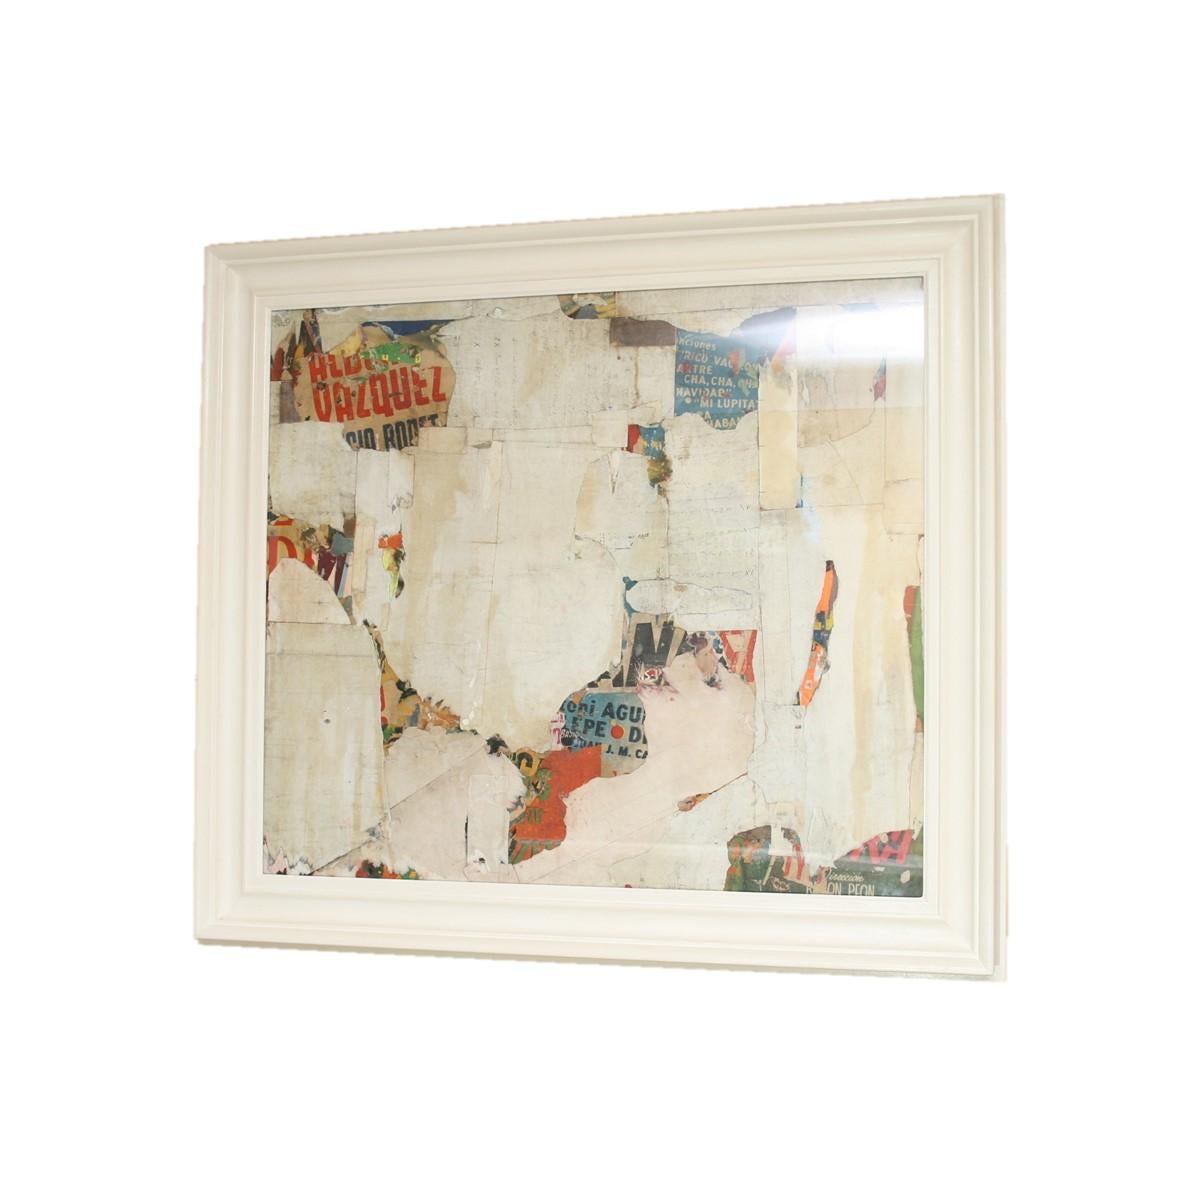 English REMNANTS 14 Medium Abstract Collage by Artist Huw Griffith